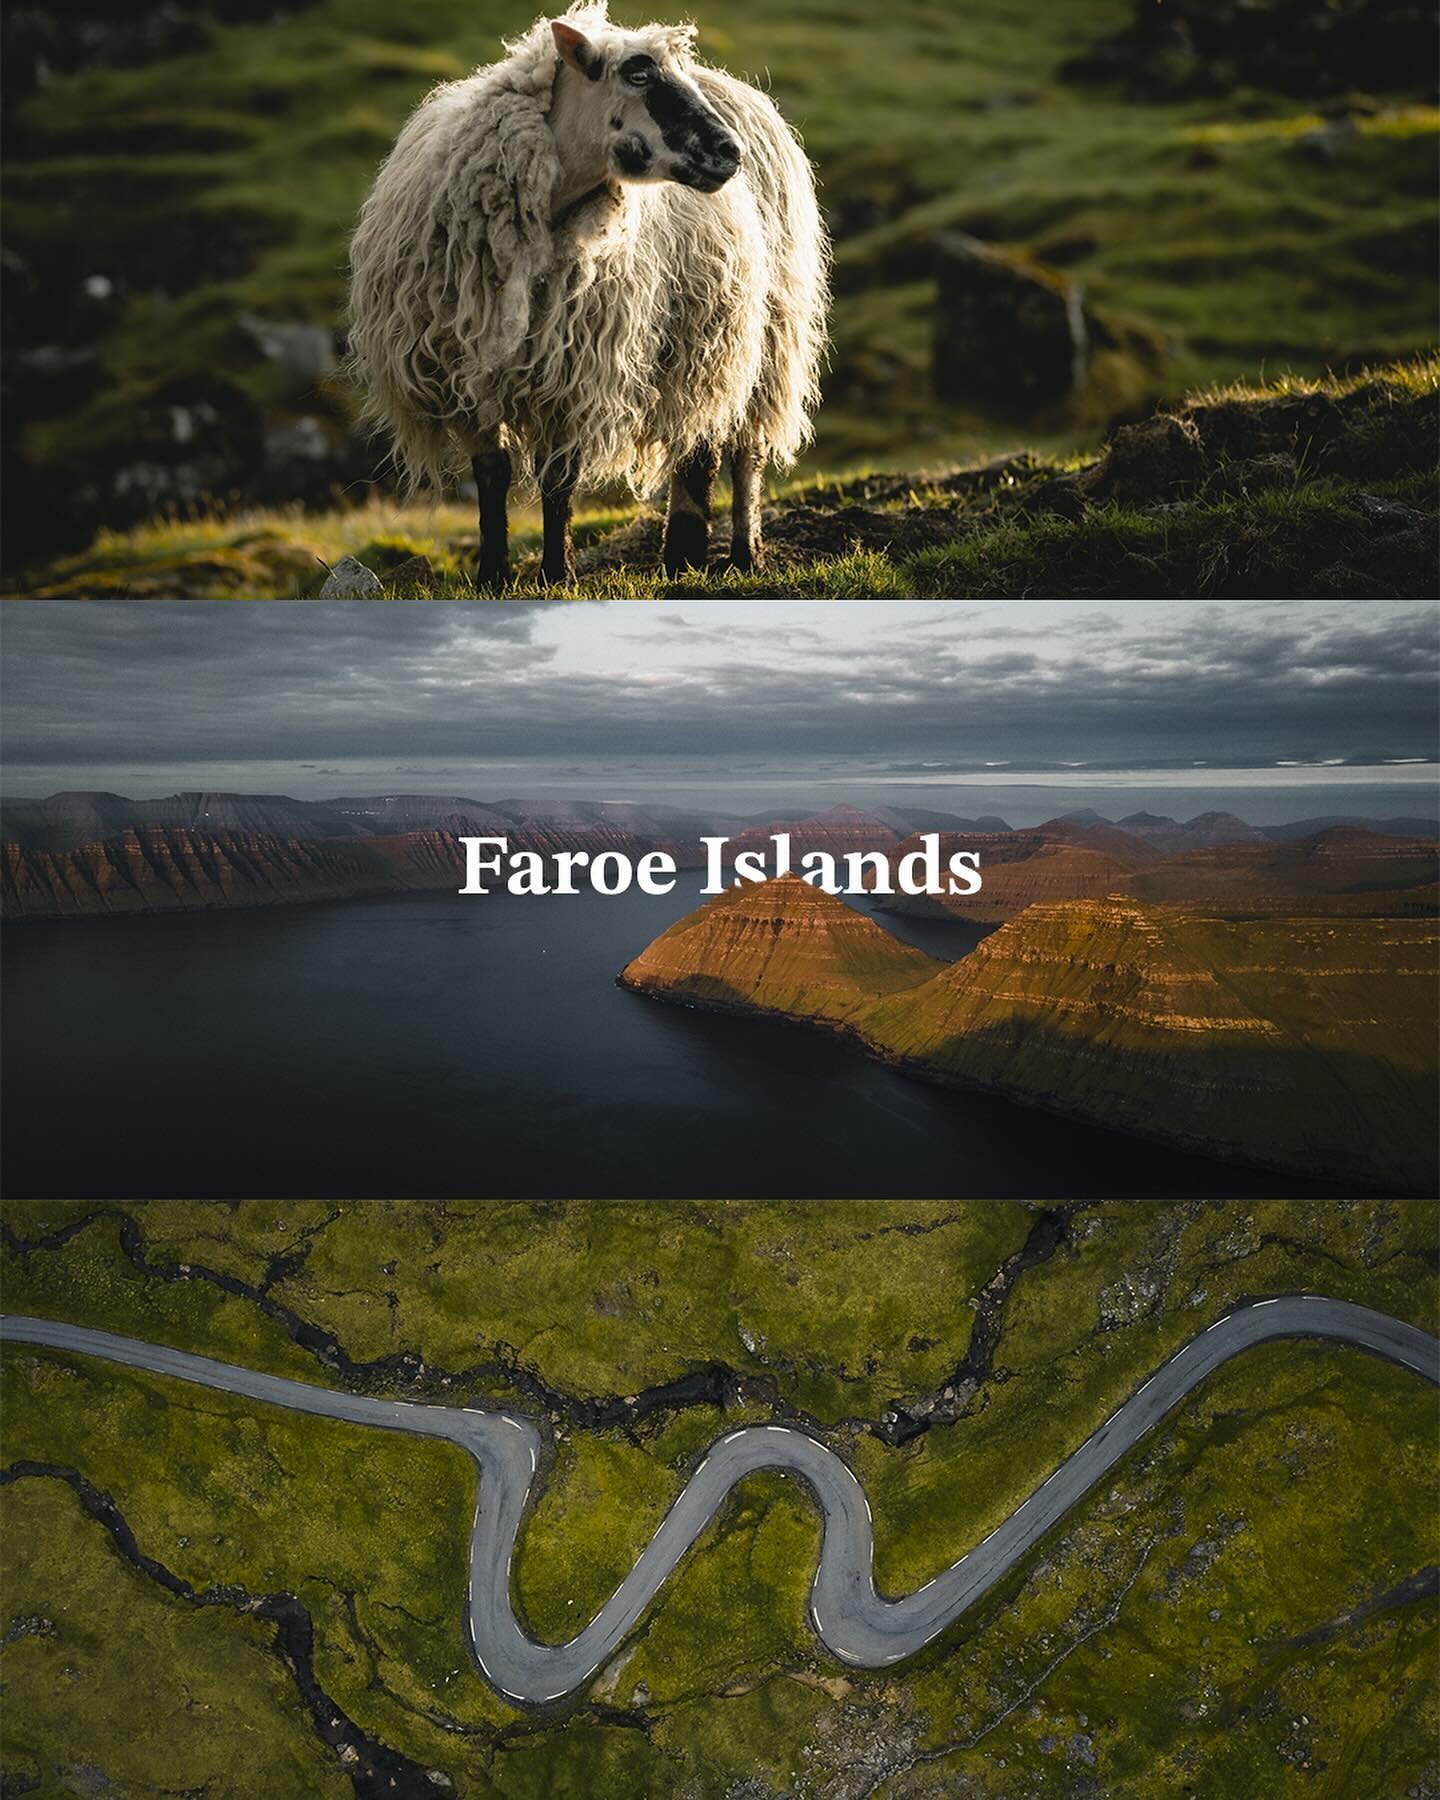 Faroe Islands

Miss this place and the unique landscapes it has to offer !
Epic journey shared with @tg_photographie_ 🙏🏻

#faroeislands #sonyalpha #bealpha #traveltoexplore #stopthegrindfaroeislands #faroeislands🇫🇴 #f&oslash;royar